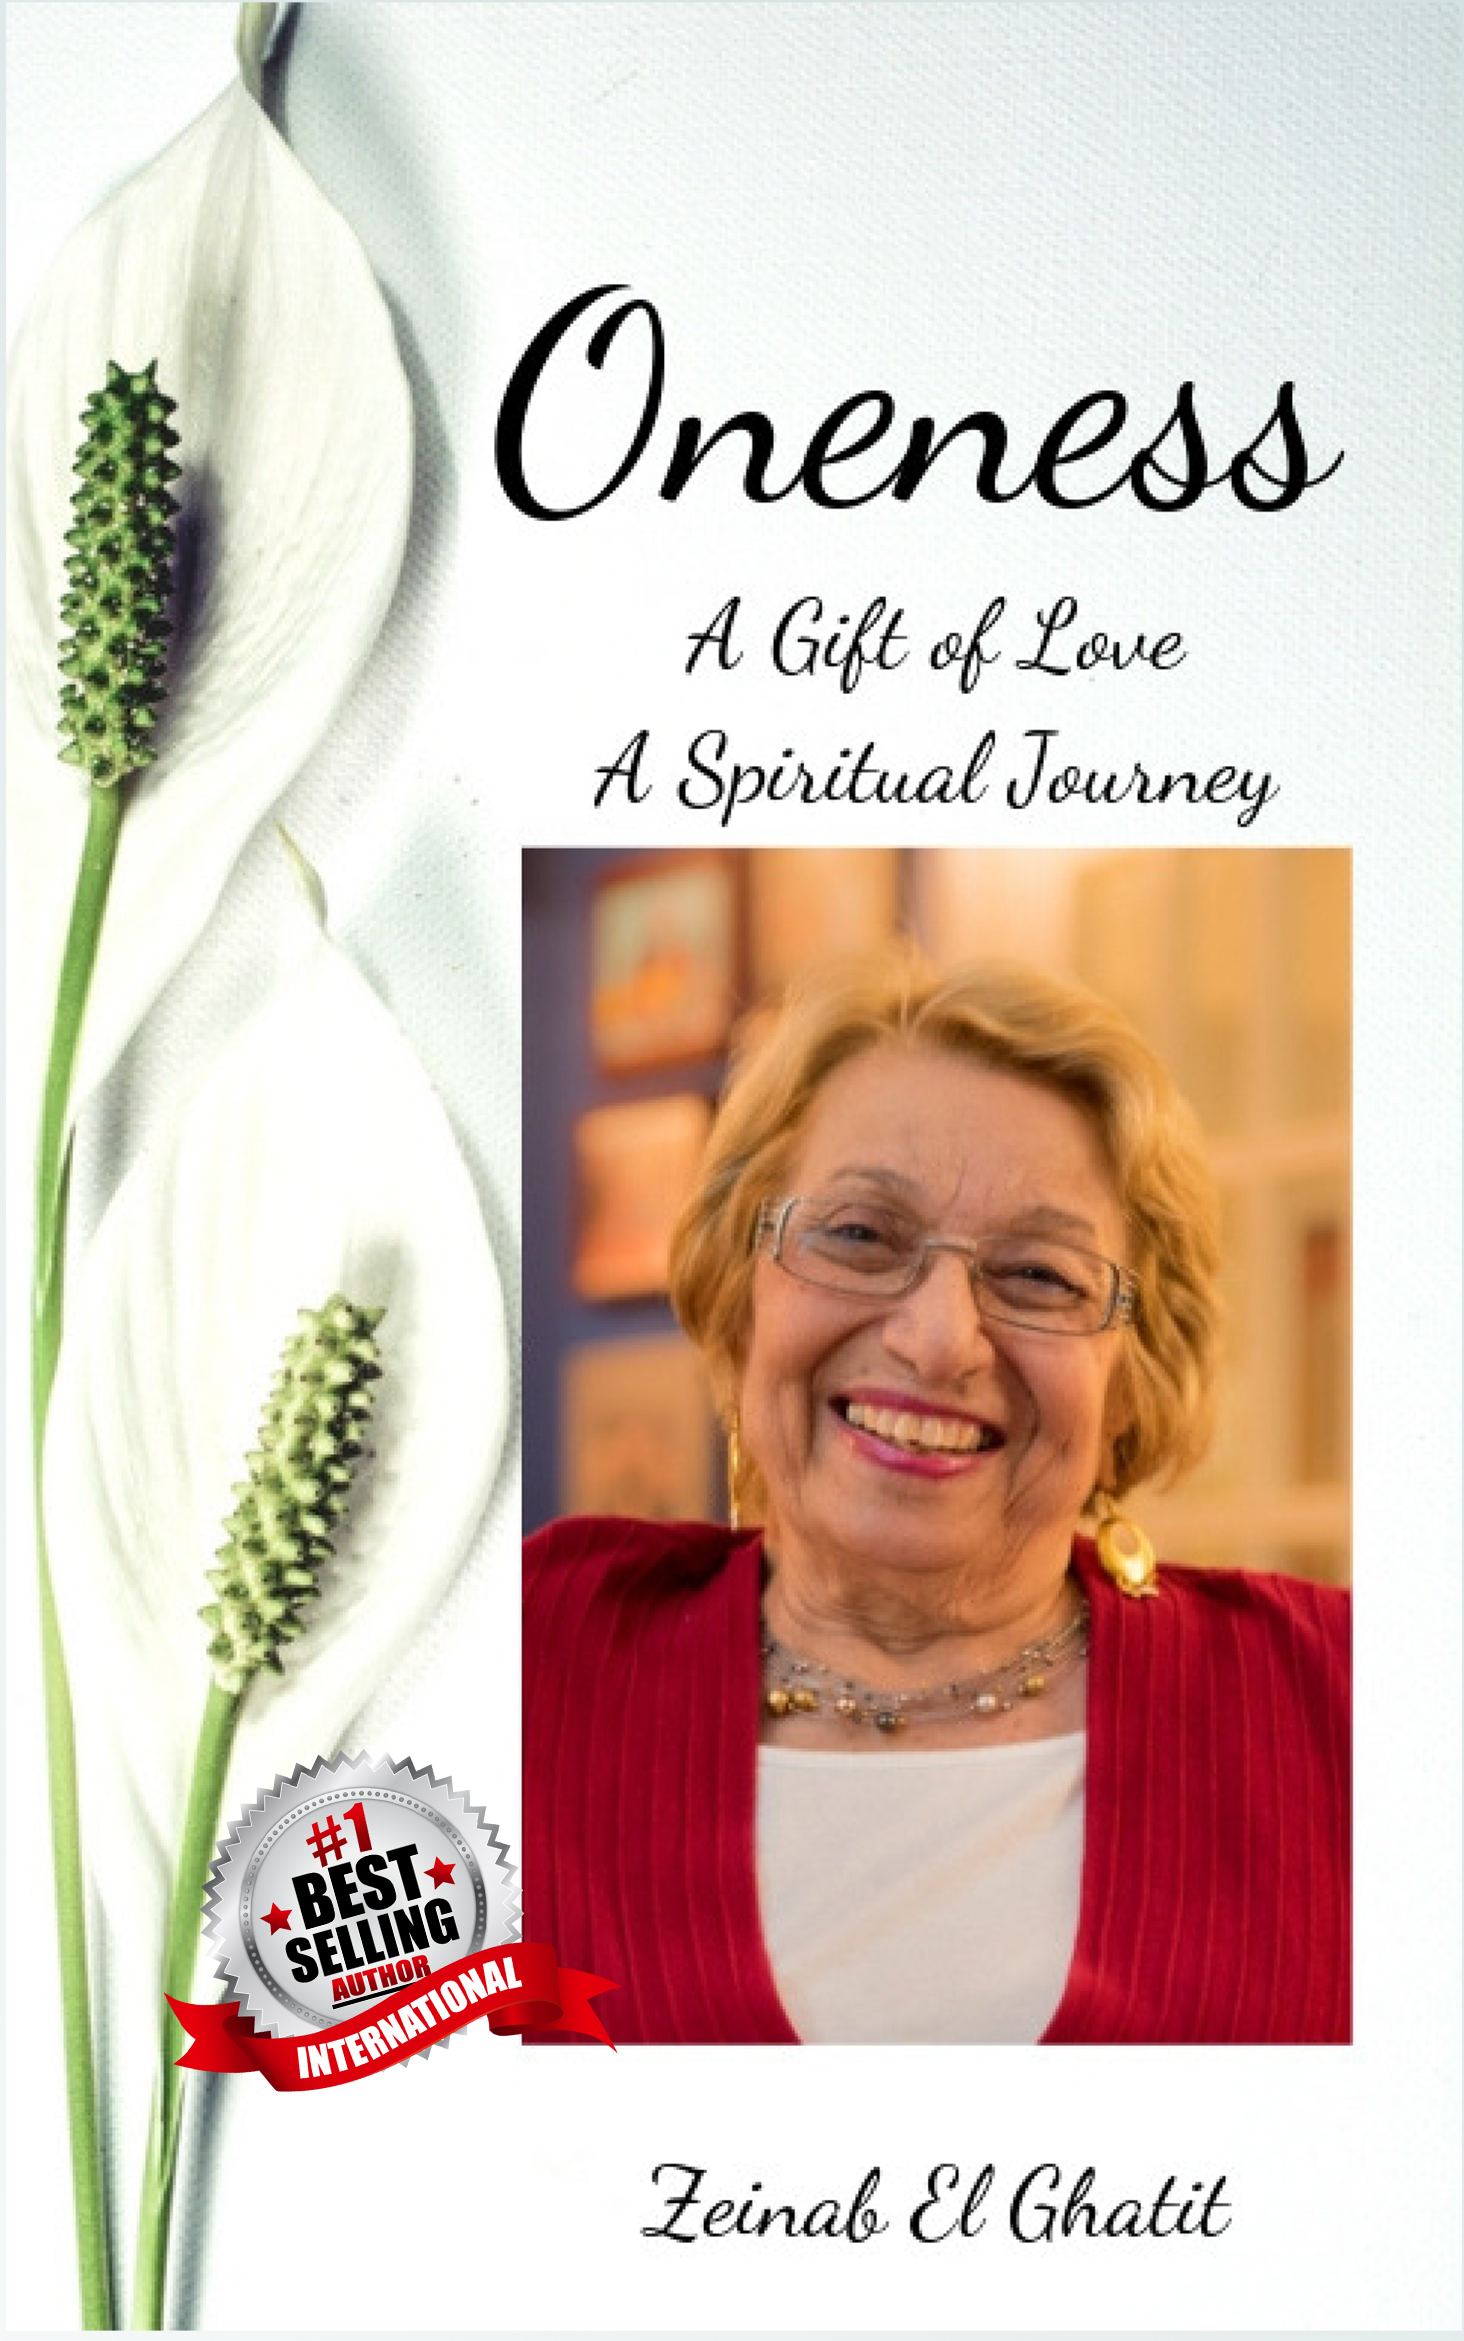 Two white flowers are along the left-hand edge of the cover. At the top in a cursive font is ONENESS: A GIFT OF LOVE A SPIRITUAL JOURNEY. Below that is a headshot of Zeinab with a big smile. Below her image in cursive font is ZEINAB EL GHATIT. Next to her image, overlayed over the flowers, is a #1 Best Selling Author International badge.